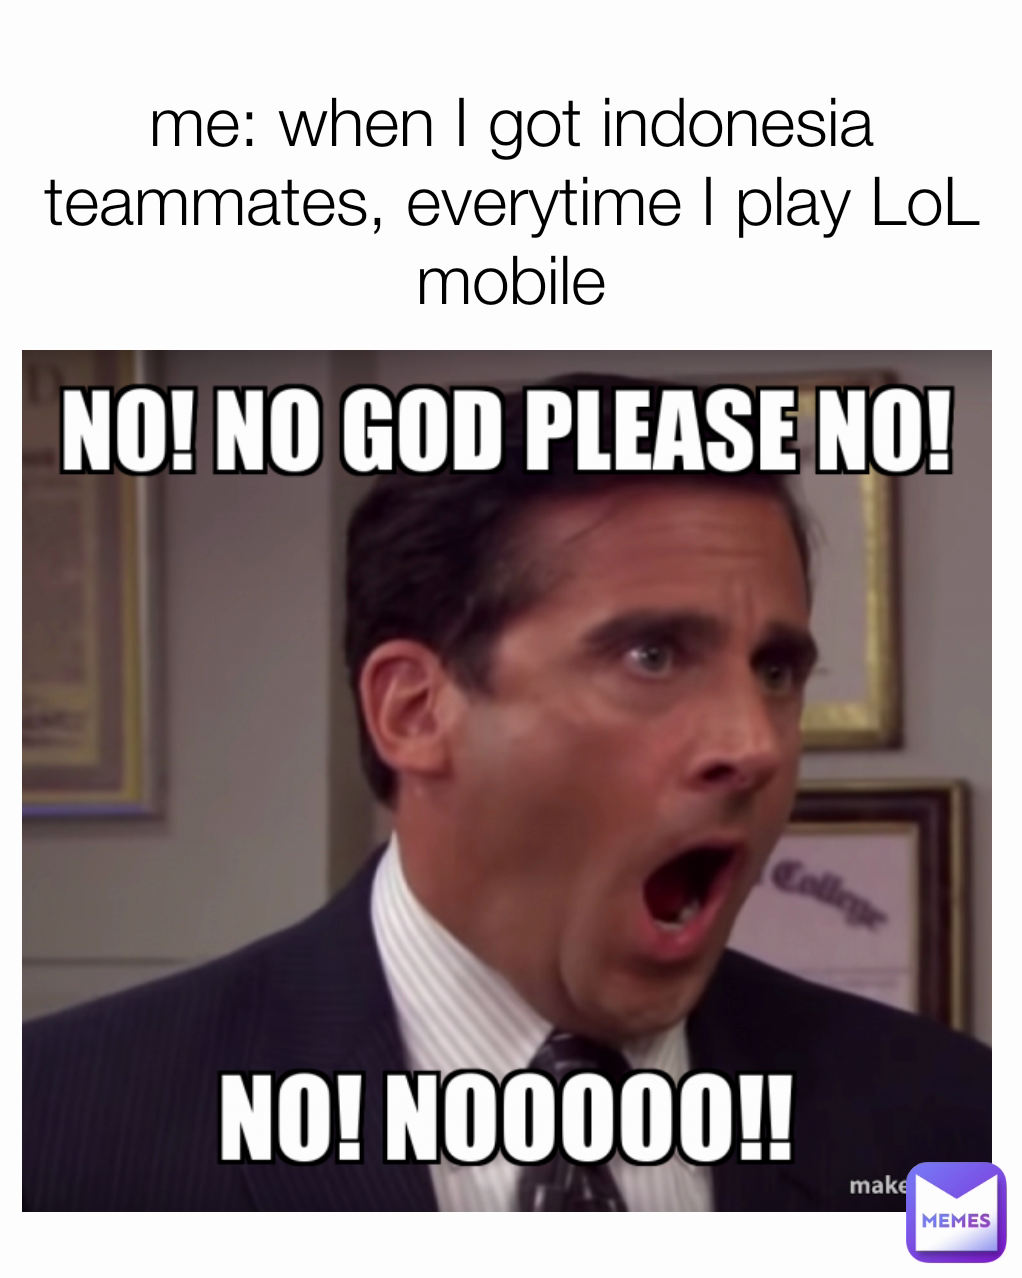 me: when I got indonesia teammates, everytime I play LoL mobile